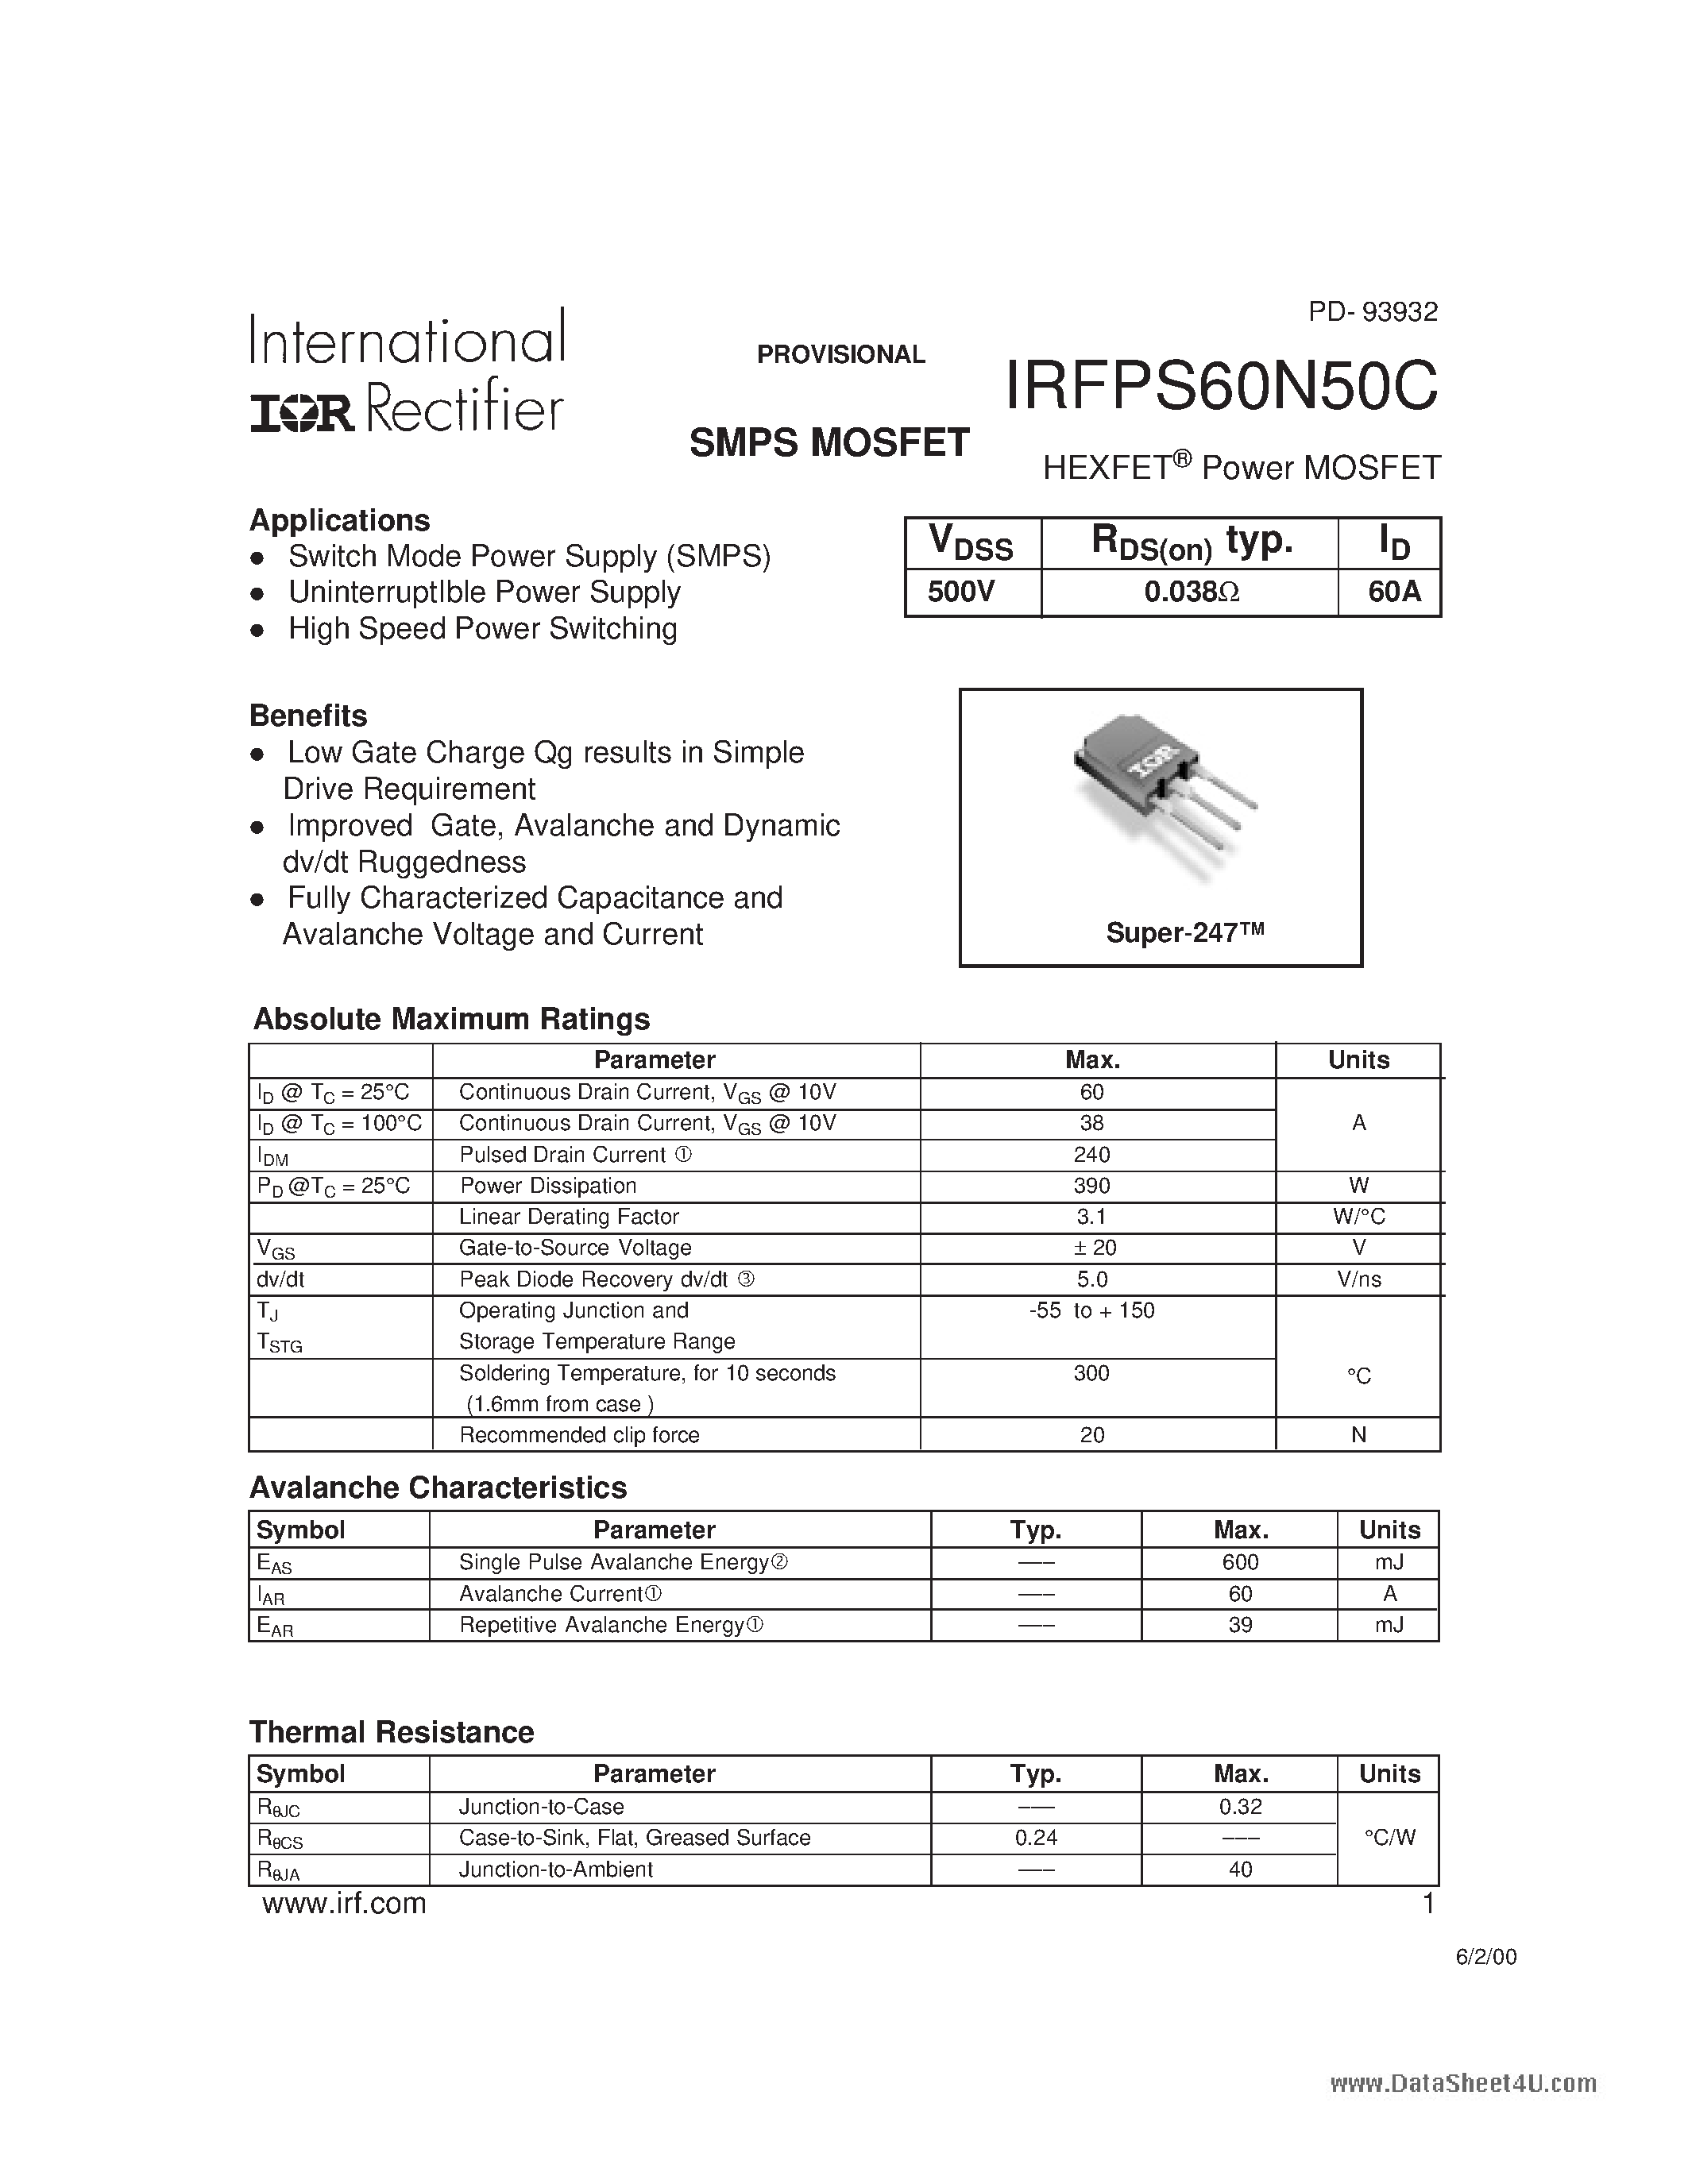 Datasheet IRFPS60N50C - HEXFET Power MOSFET page 1